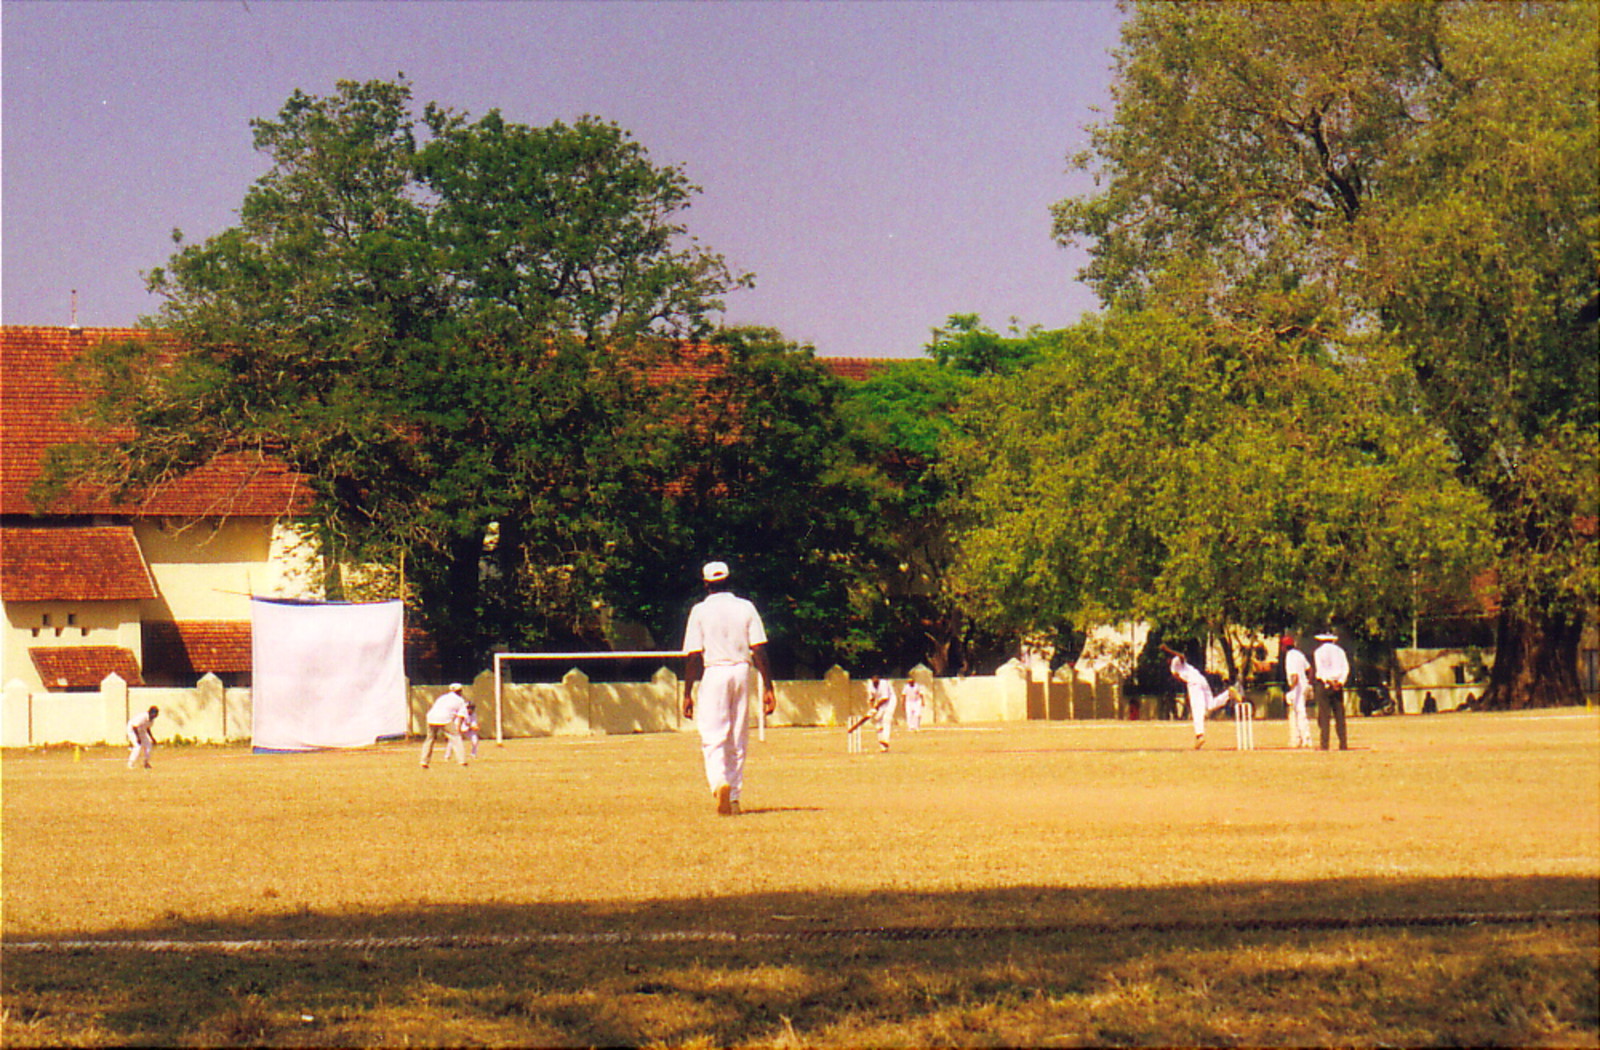 Sunday cricket on the green in front of St Francis' Church